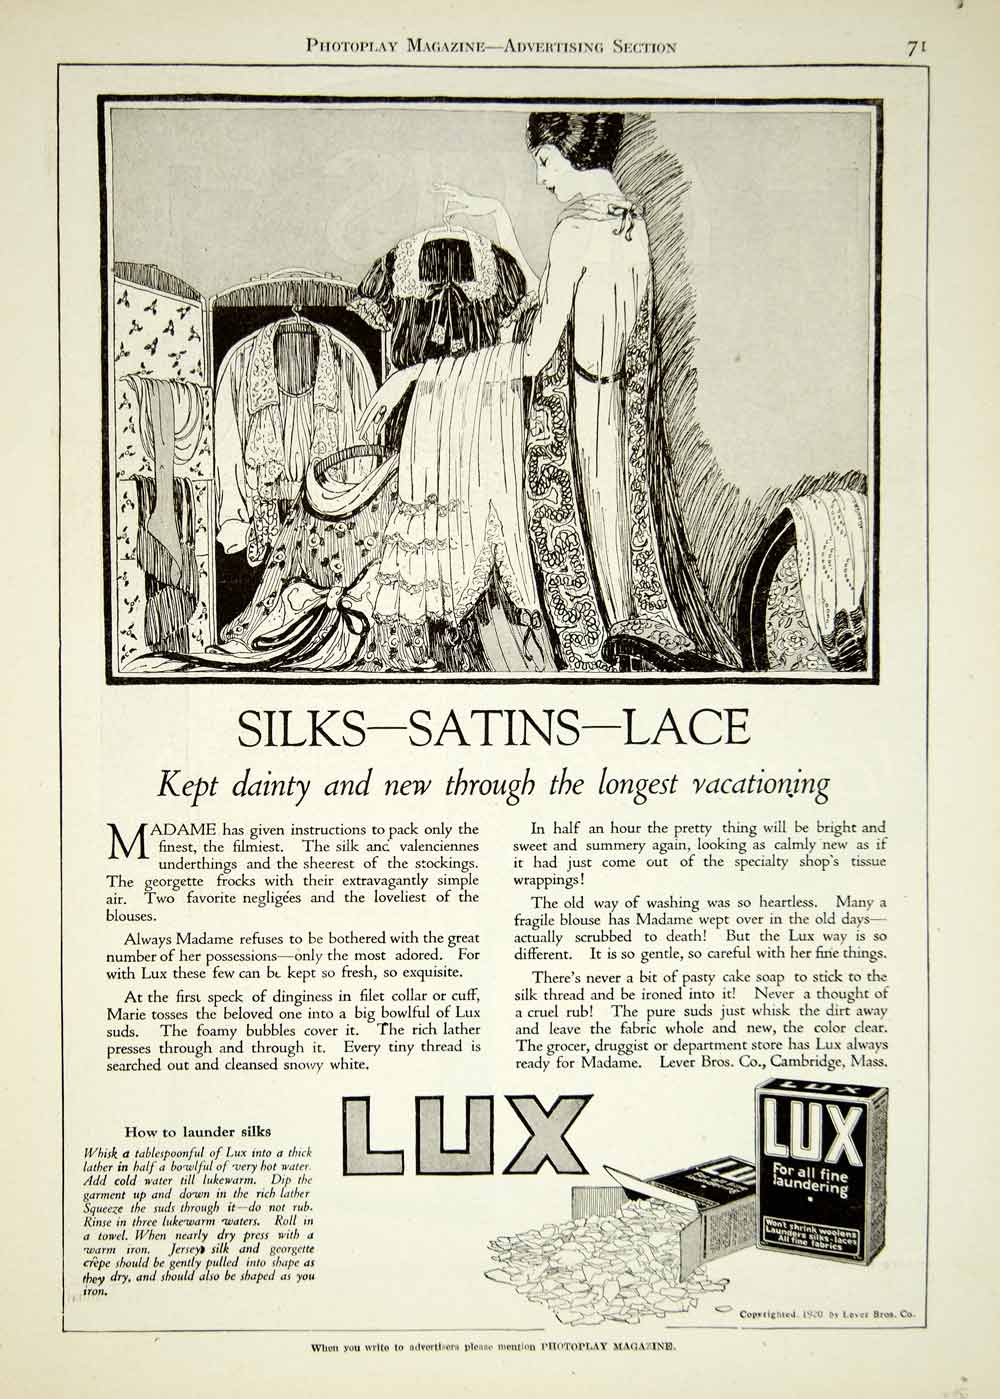 1920 Ad Lux Laundry Soap Fine Laundering Clothes Maid Packing Wardrobe YPP1